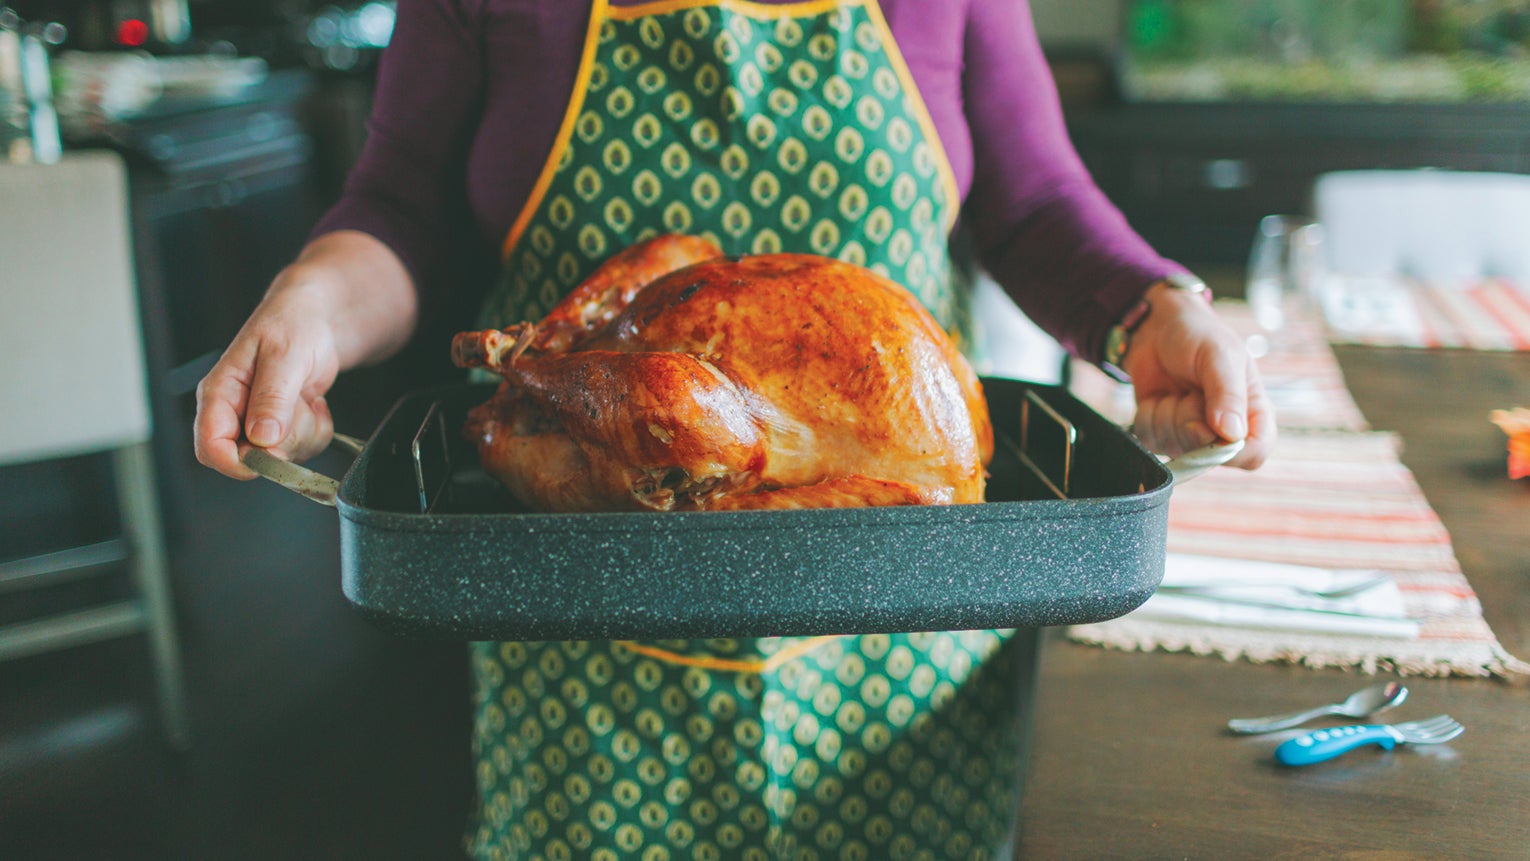 Consumer Reports tests pop-up turkey timers